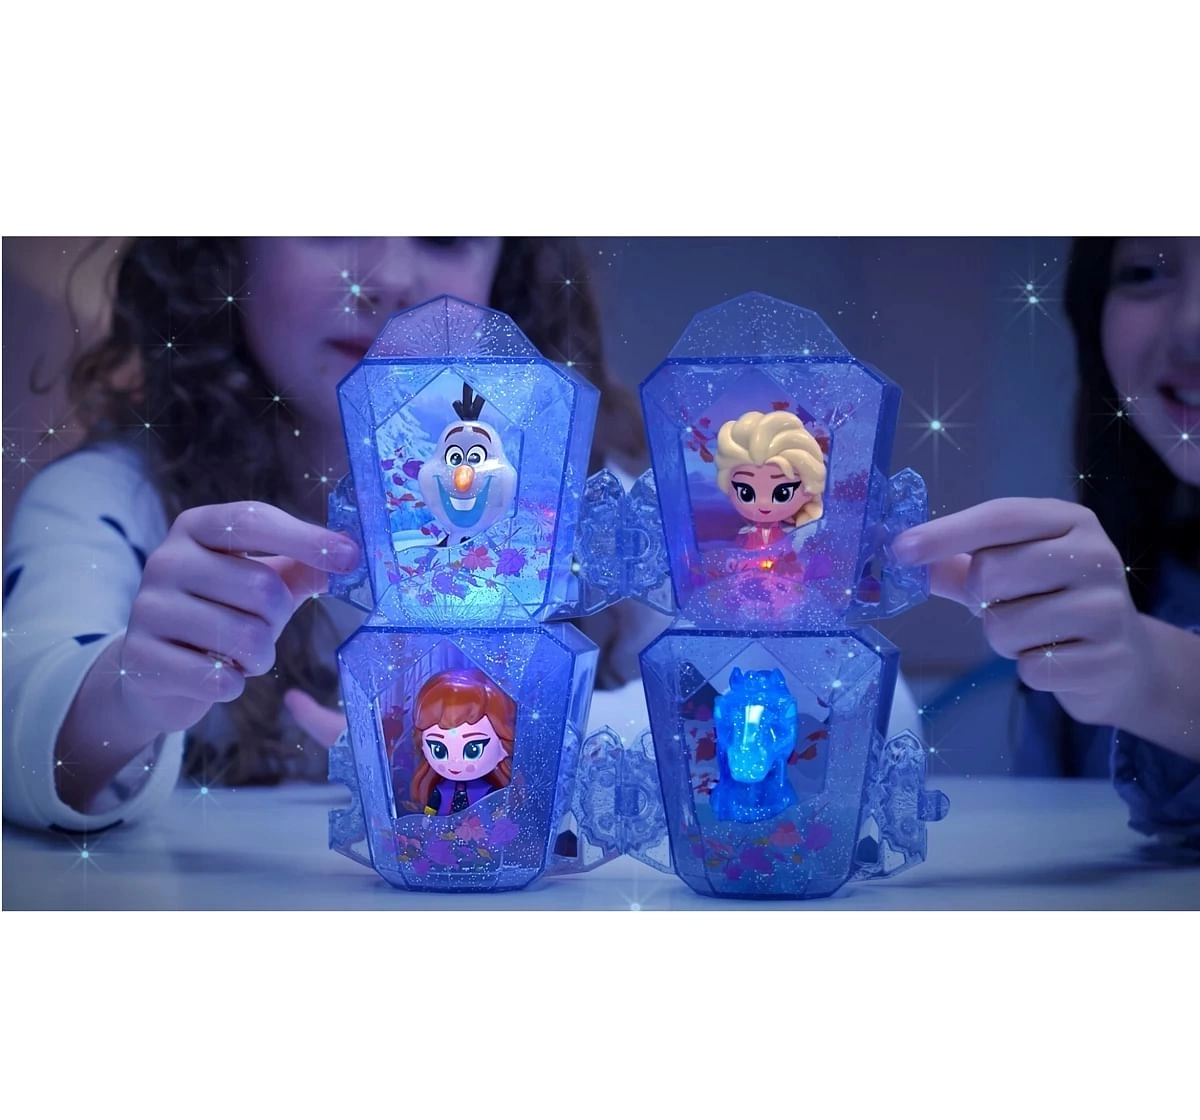 Frozen 2 Whisper & Glow3d Mini Figure Display House (Style may very), Multicolor